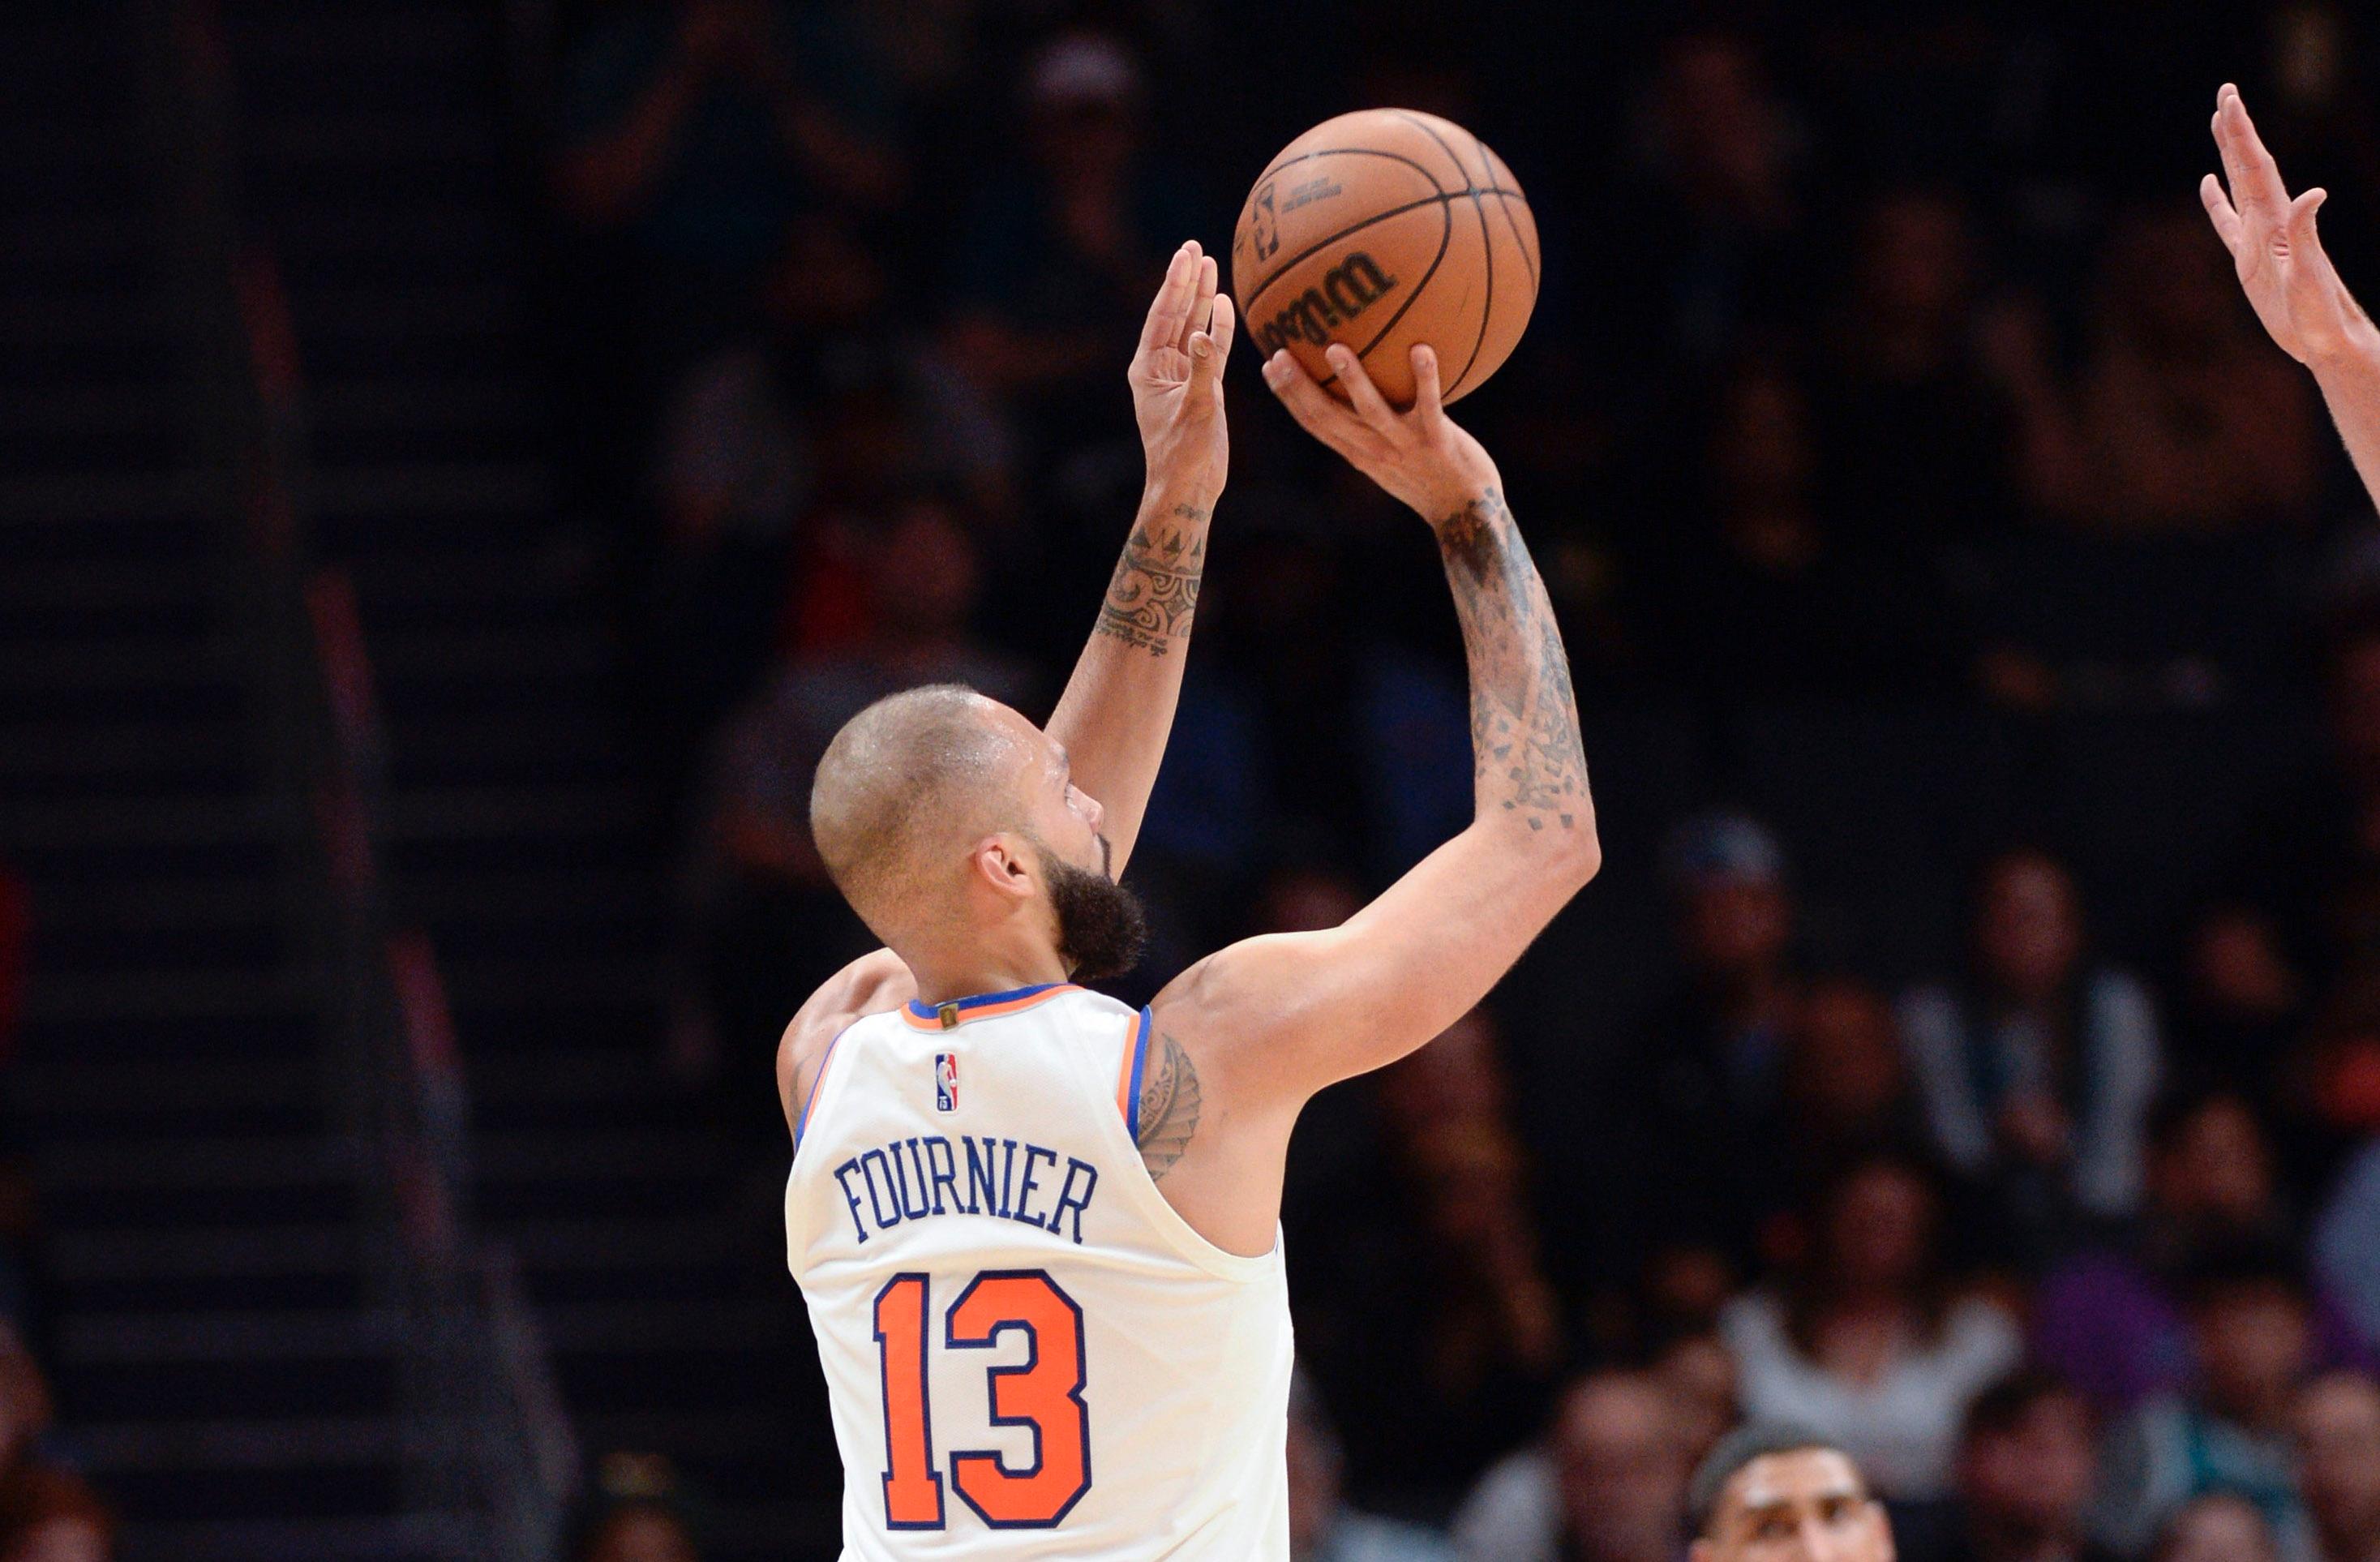 New York Knicks guard forward Evan Fournier (13) shoots and makes a three point shot that makes him the all time three point scorer in franchise history during the second half against the Charlotte Hornets at the Spectrum Center / Sam Sharpe-USA TODAY Sports